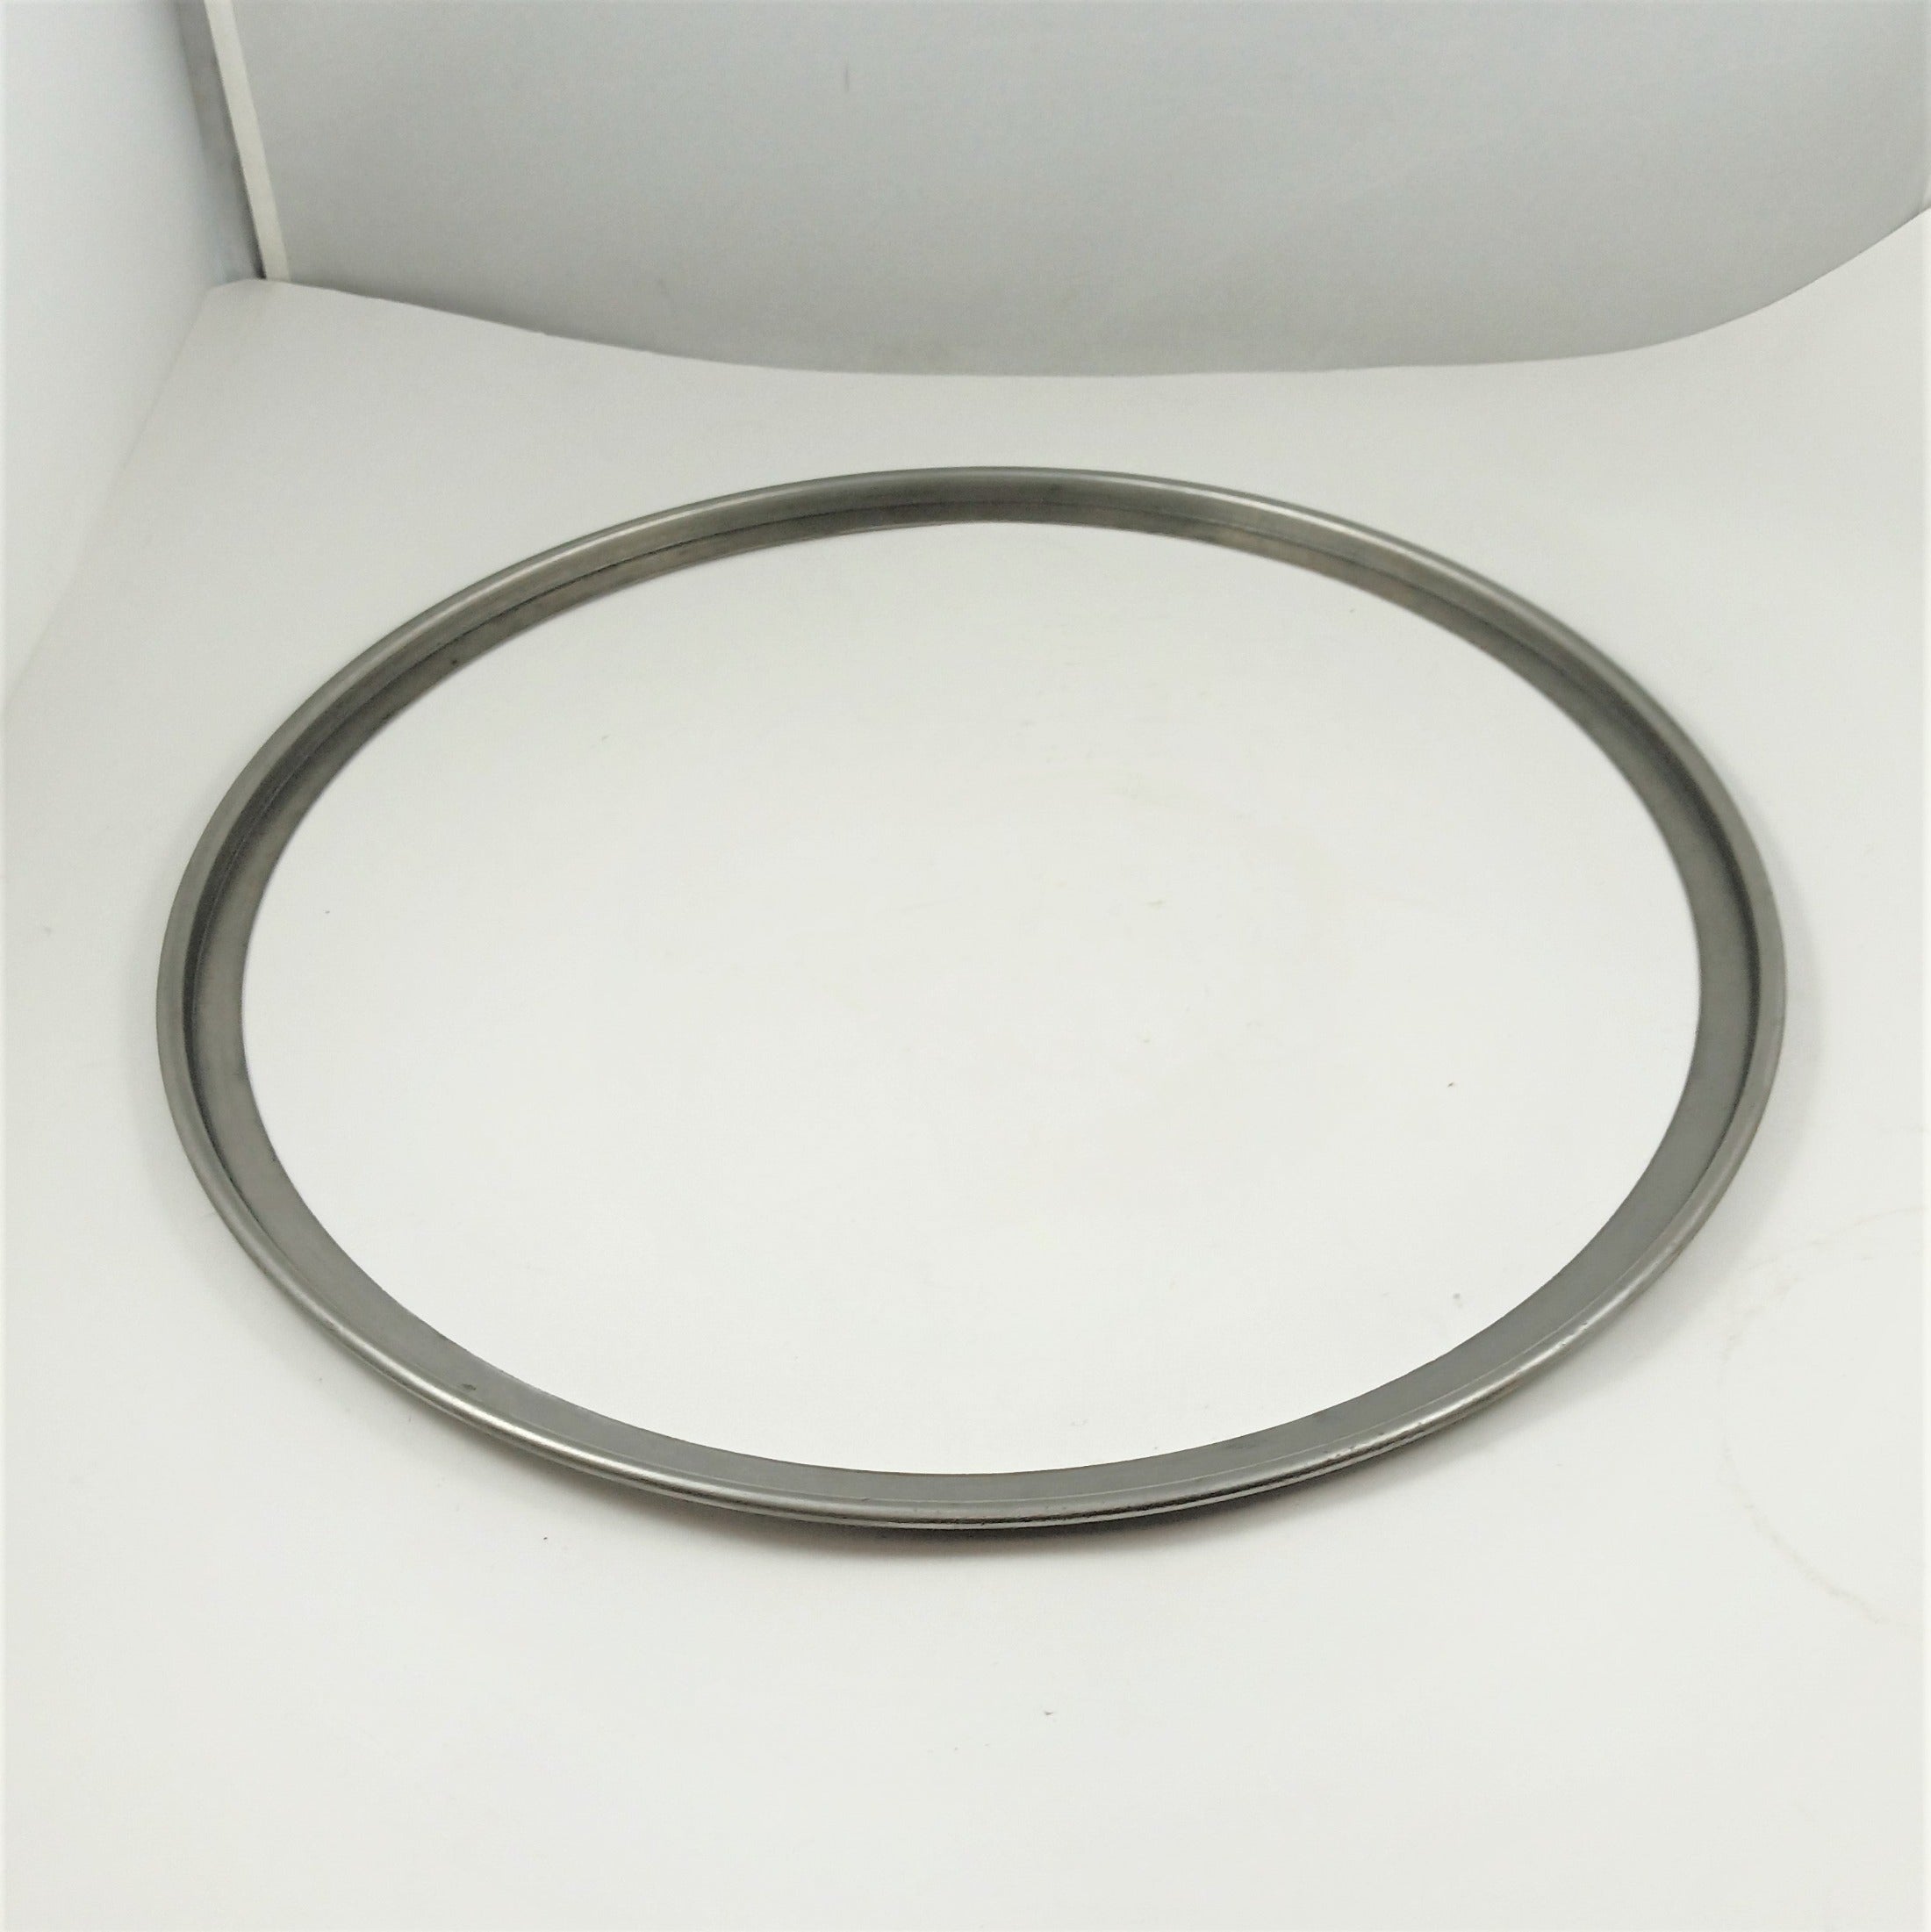 14 inch wide unfinished steel ring